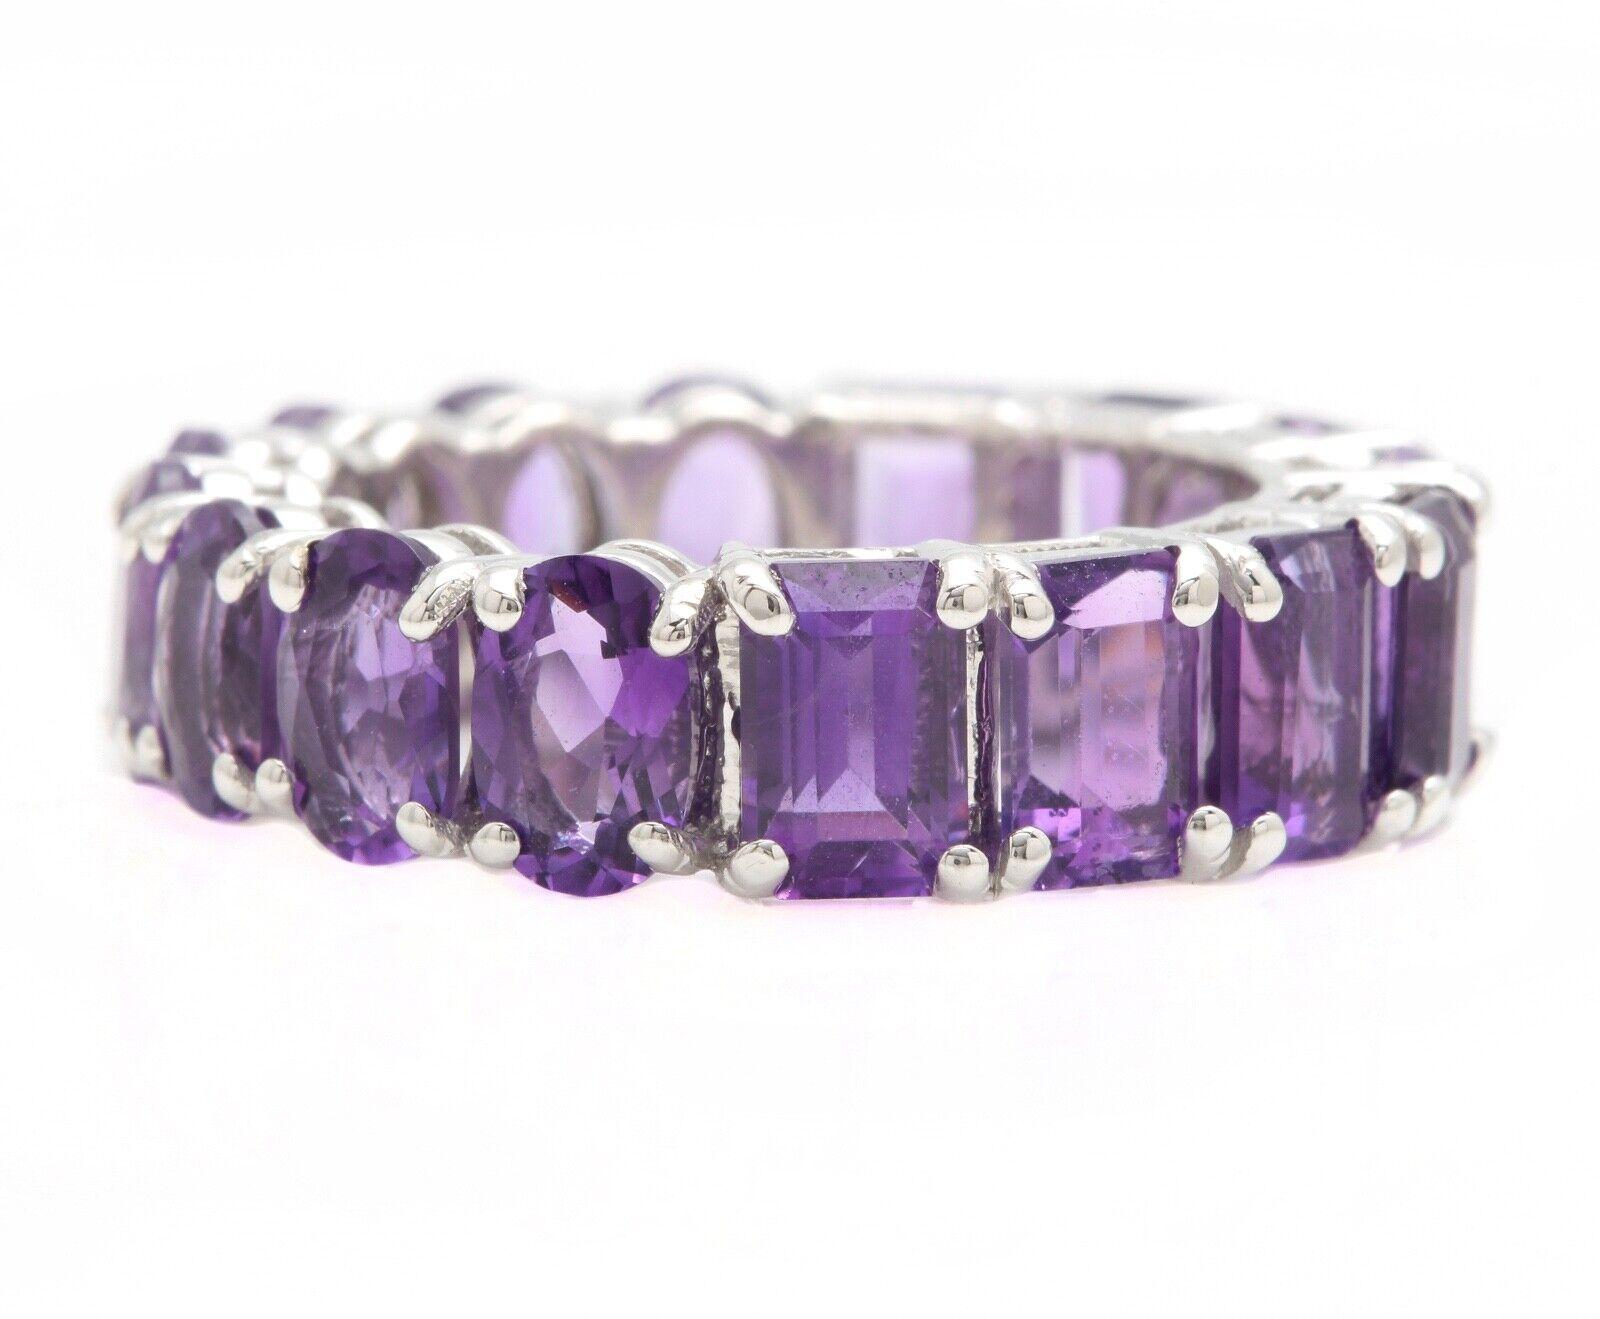 8.00 Carats Exquisite Natural Amethyst 14K Solid White Gold Ring

Total Natural Oval and Emerald Cut Amethysts Weight is: Approx. 8.00 Carats 

Amethyst Measures: Approx. 6.00 x 4.00mm

Ring size: 7 ( not sizable)

Ring total weight: Approx. 6.6